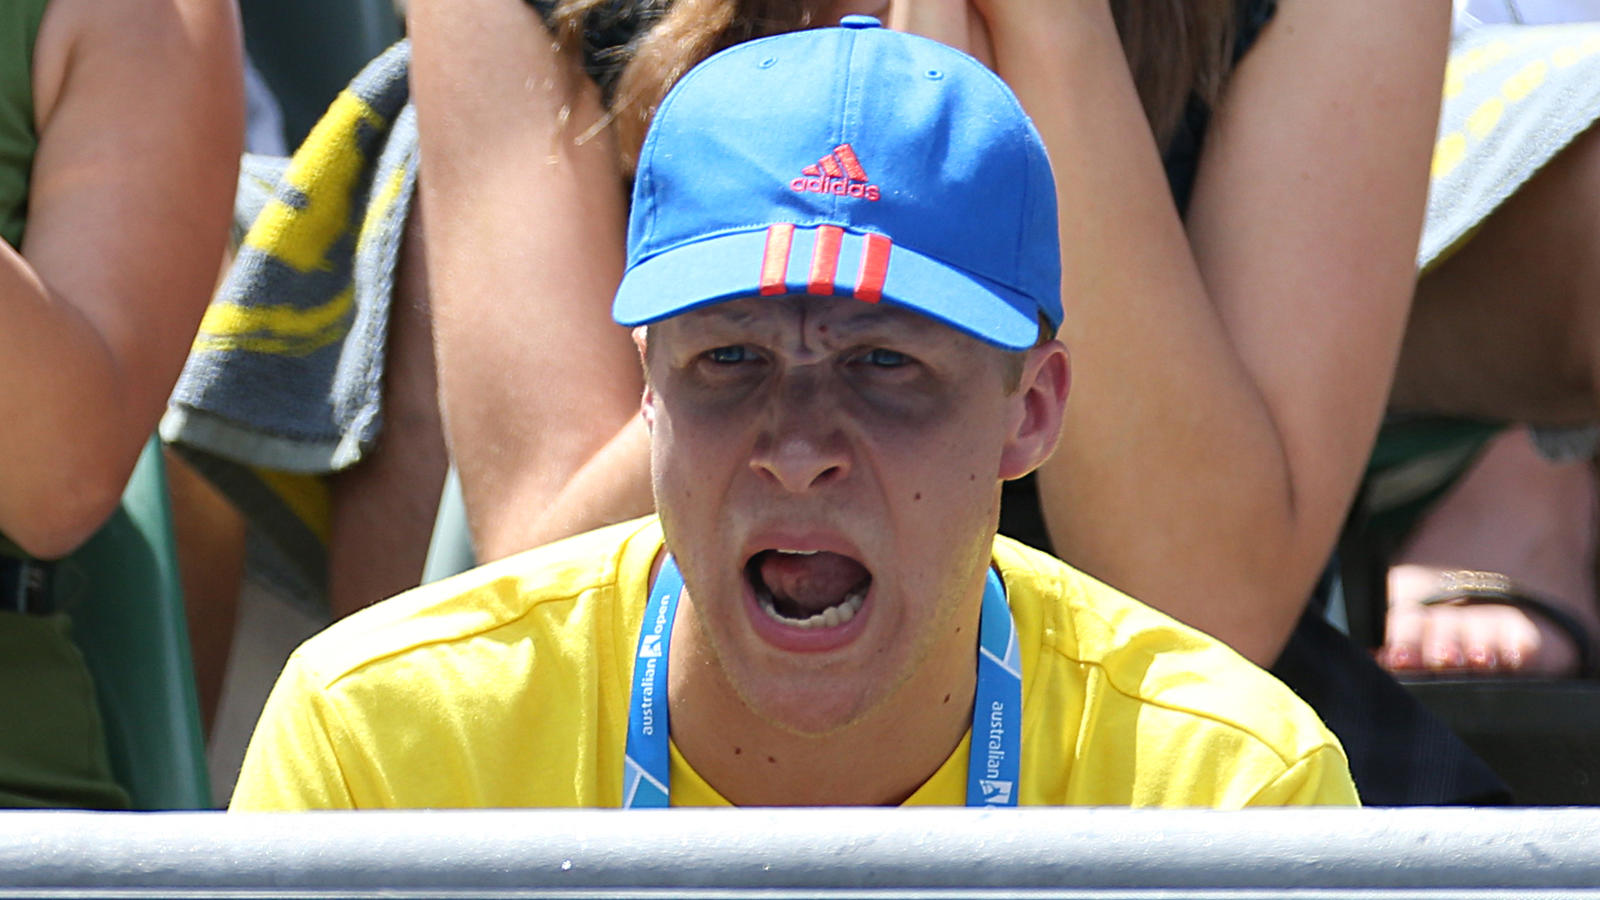 Oliver Pocher sits with Martina Hingis to watch Sabine Lisicki as she loses her second round match against Monica Niculescu at day 3 of the Australian Open in Melbourne.Oliver was very animated as he cheered for Sabine.